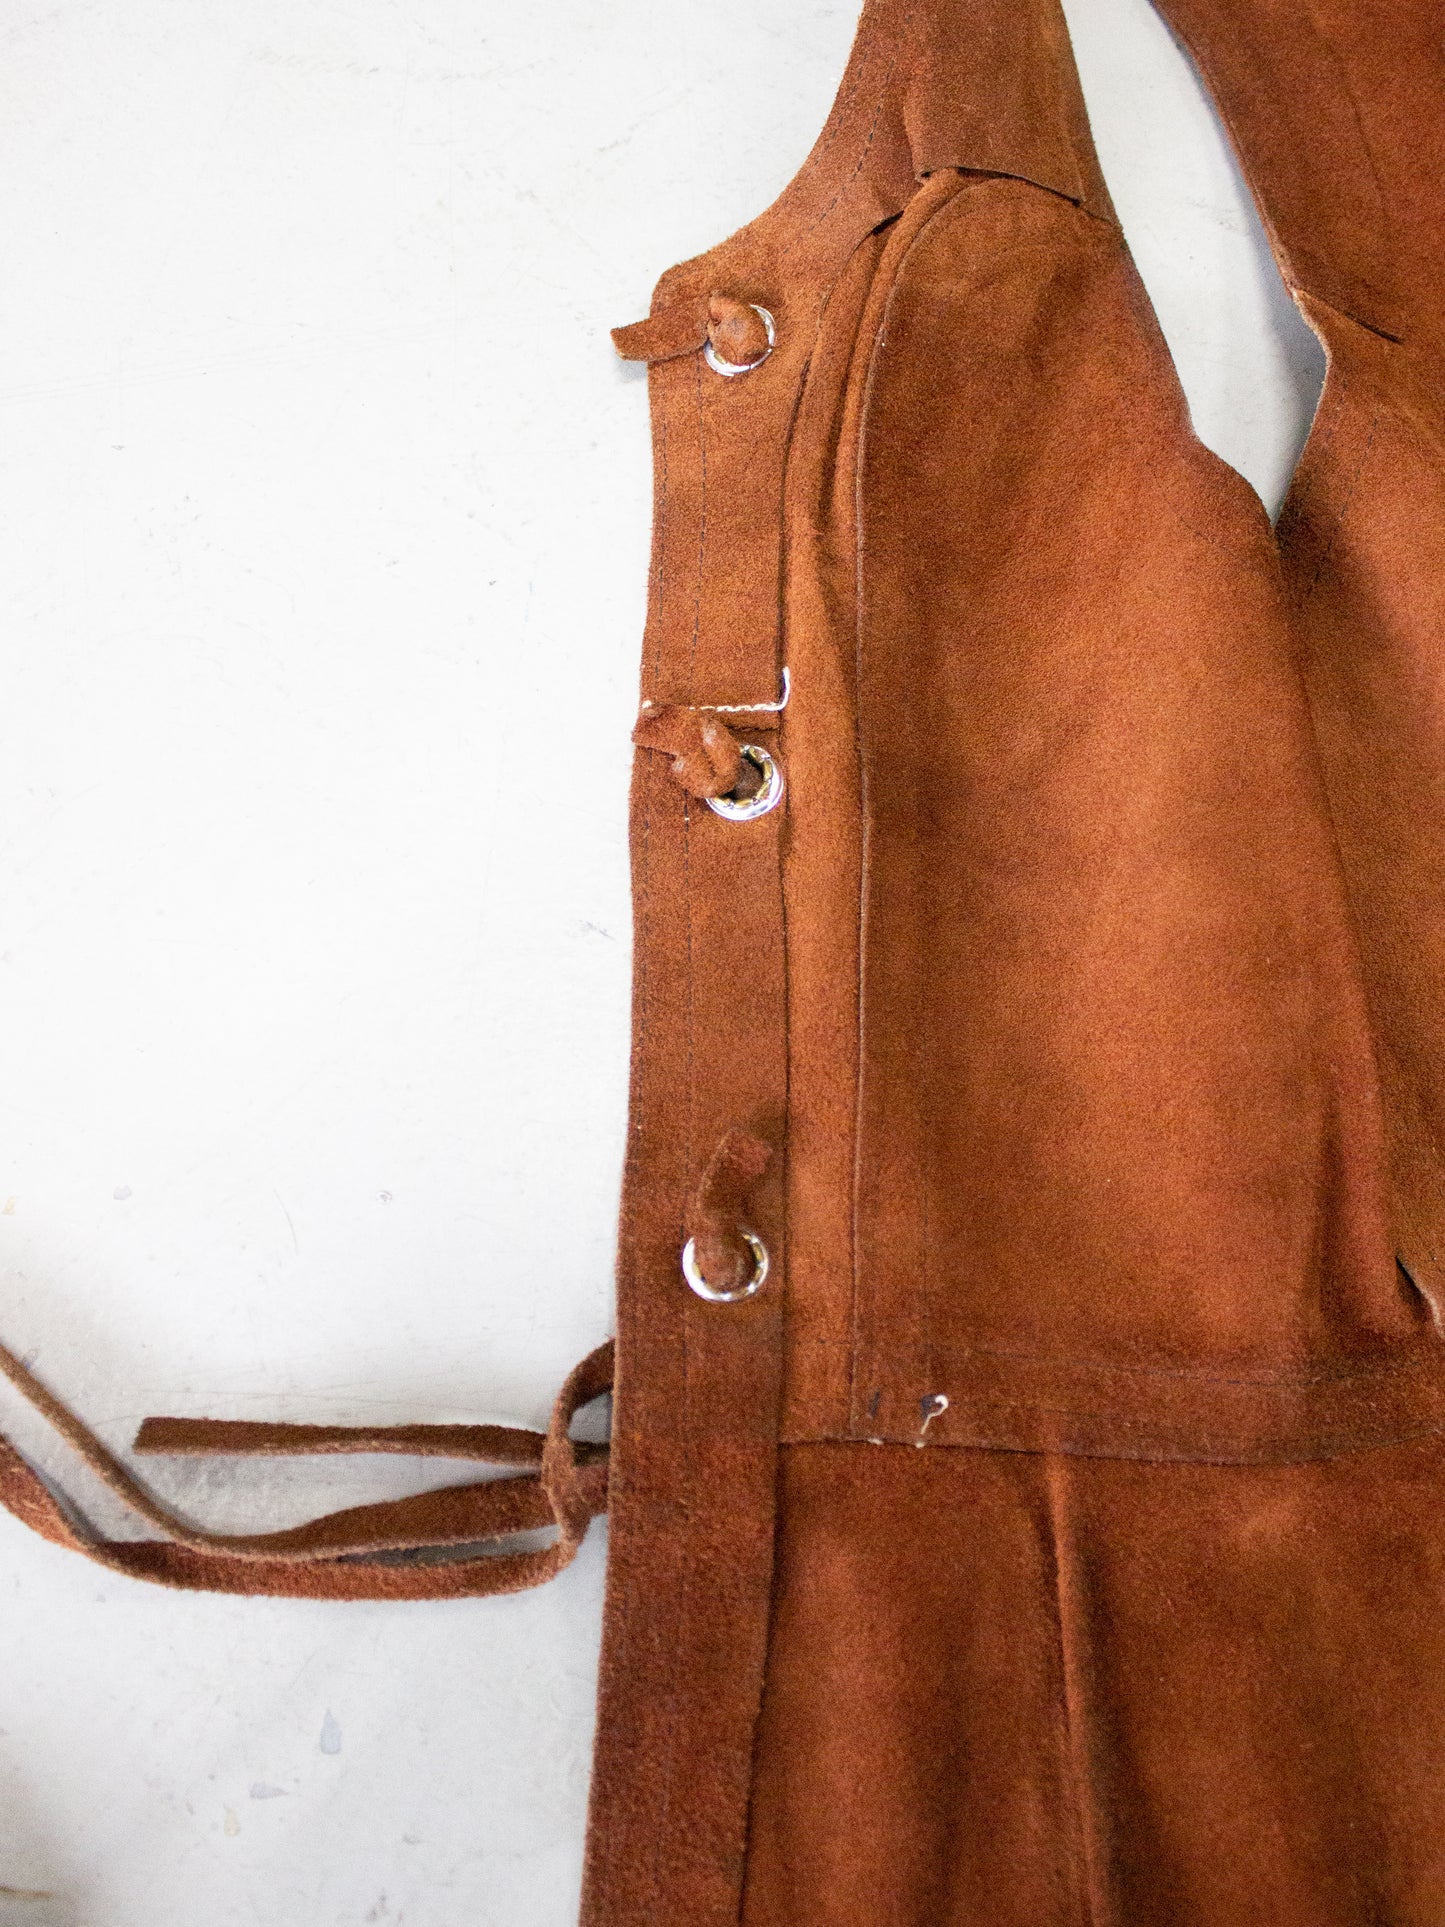 1970's Brown Suede Leather Vest + Skirt Set by Bagatelle Made in Canada (Small)